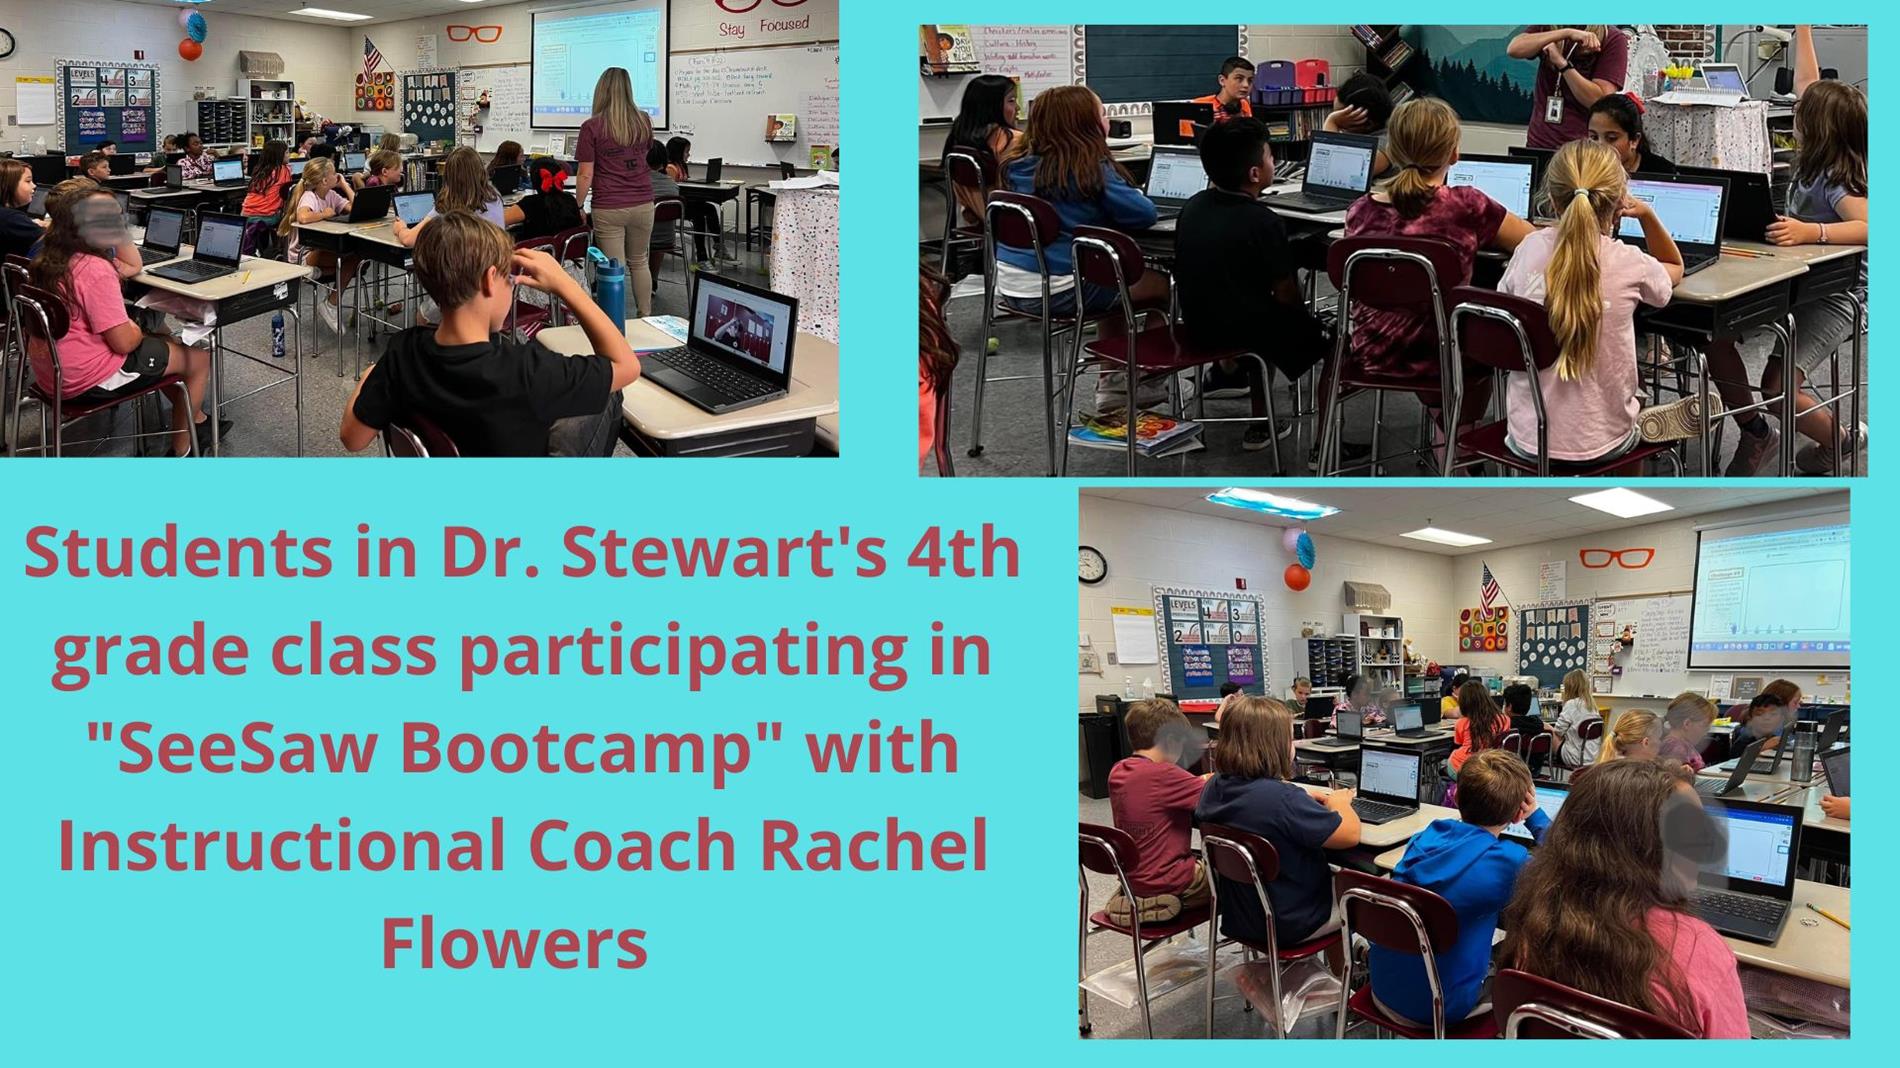 Students in Dr. Stewart's class participate in SeeSaw bootcamp with Rachel Flowers